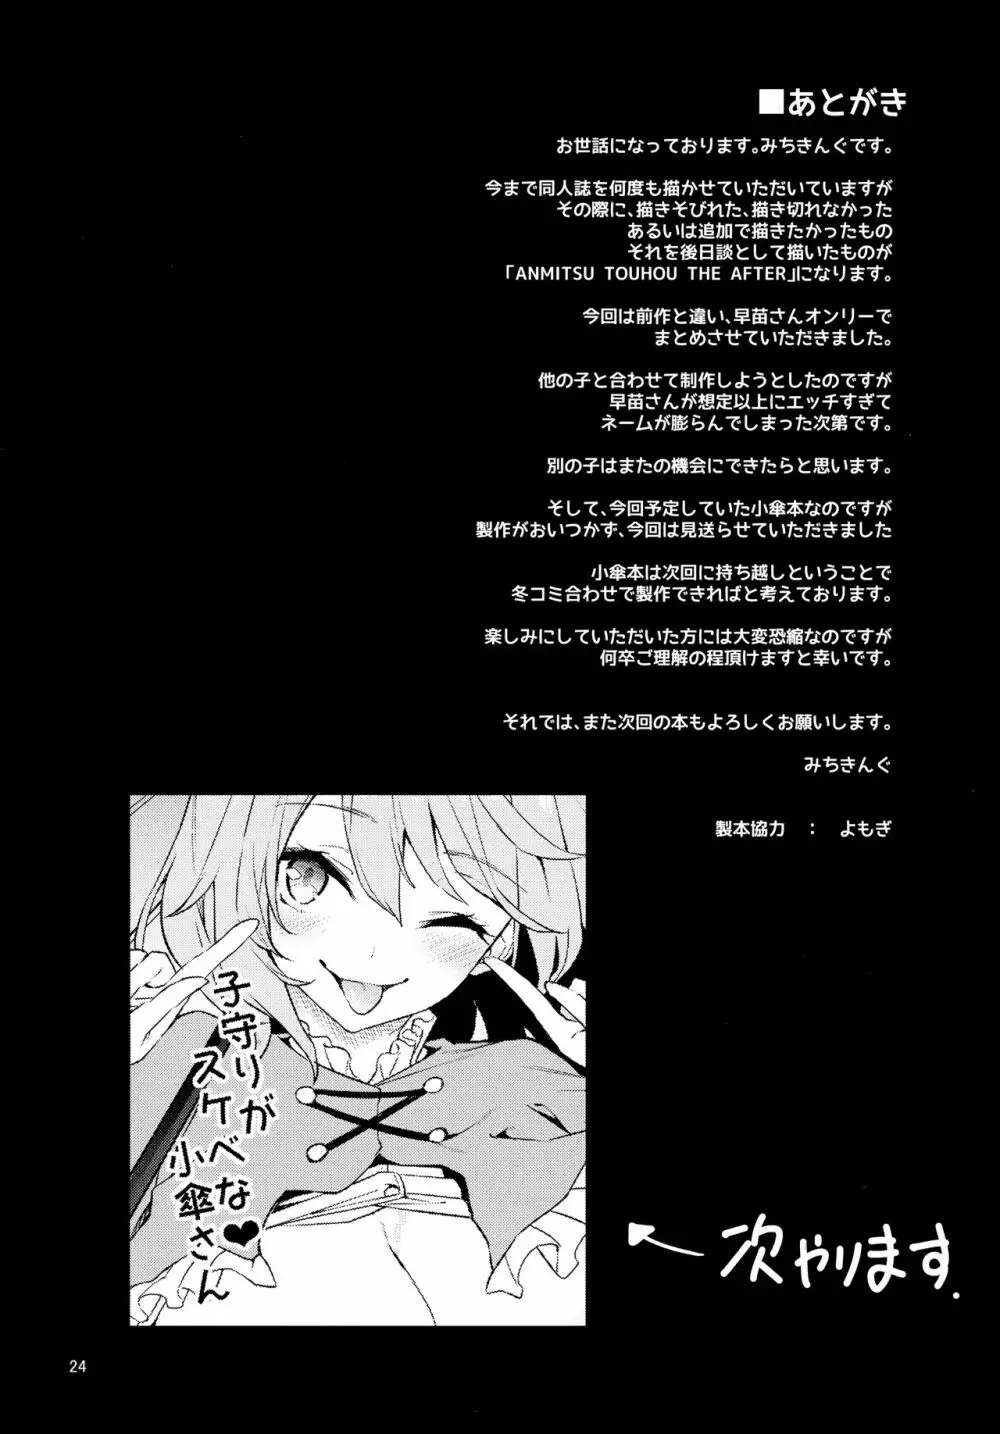 ANMITSU TOUHOU THE AFTER Vol.2 23ページ